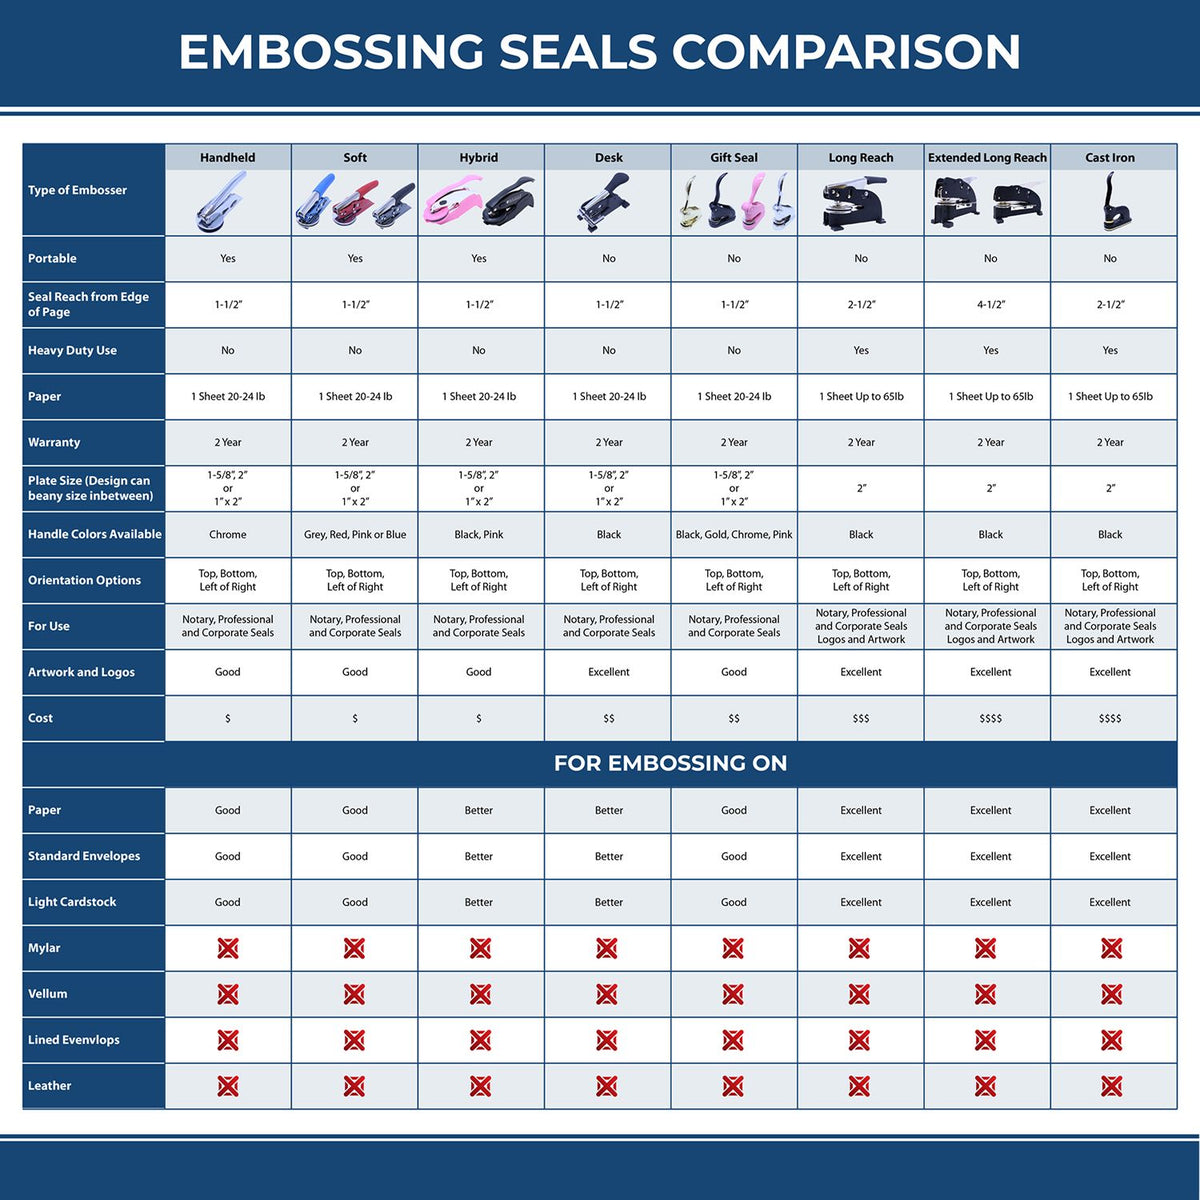 A comparison chart for the different types of mount models available for the Maine Desk Architect Embossing Seal.